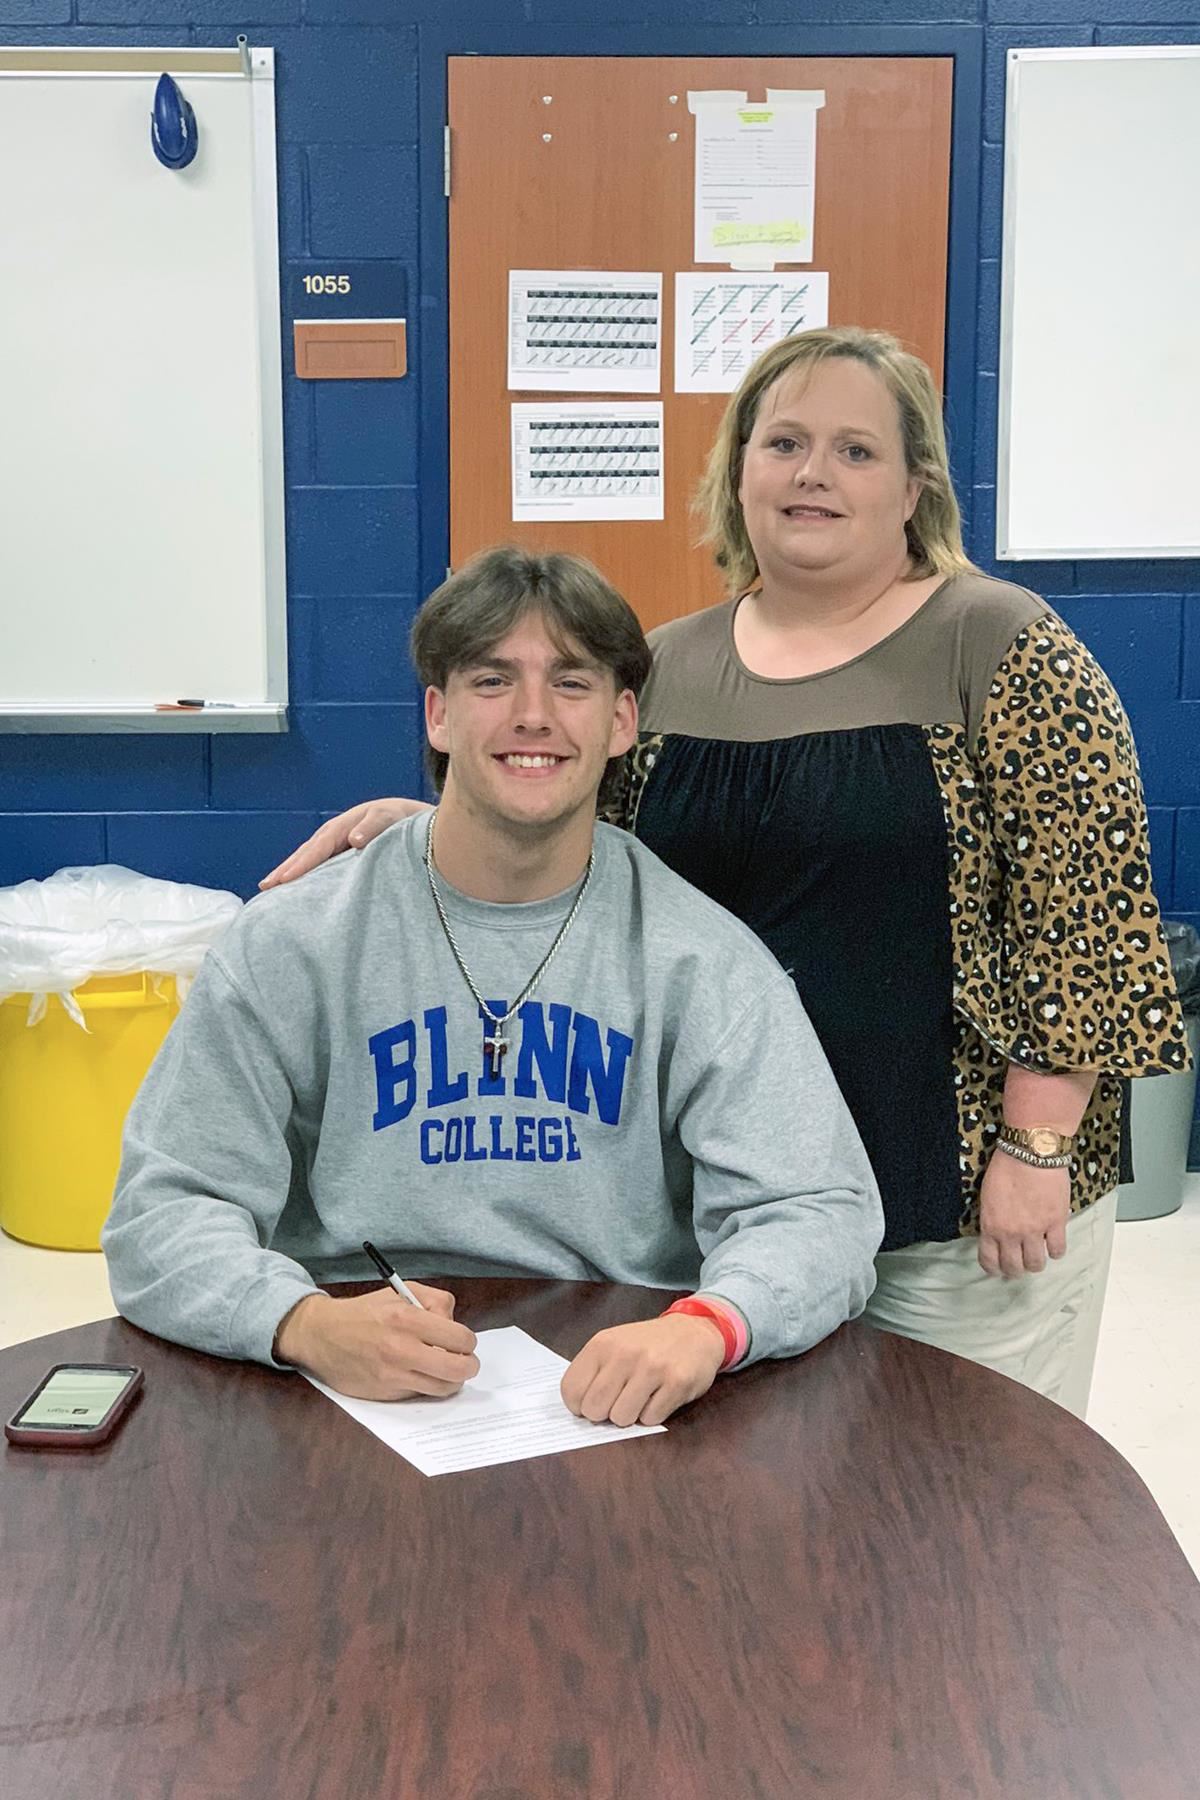 Cypress Ridge High School senior Cody Vern signed a letter of intent to play baseball at Blinn College.